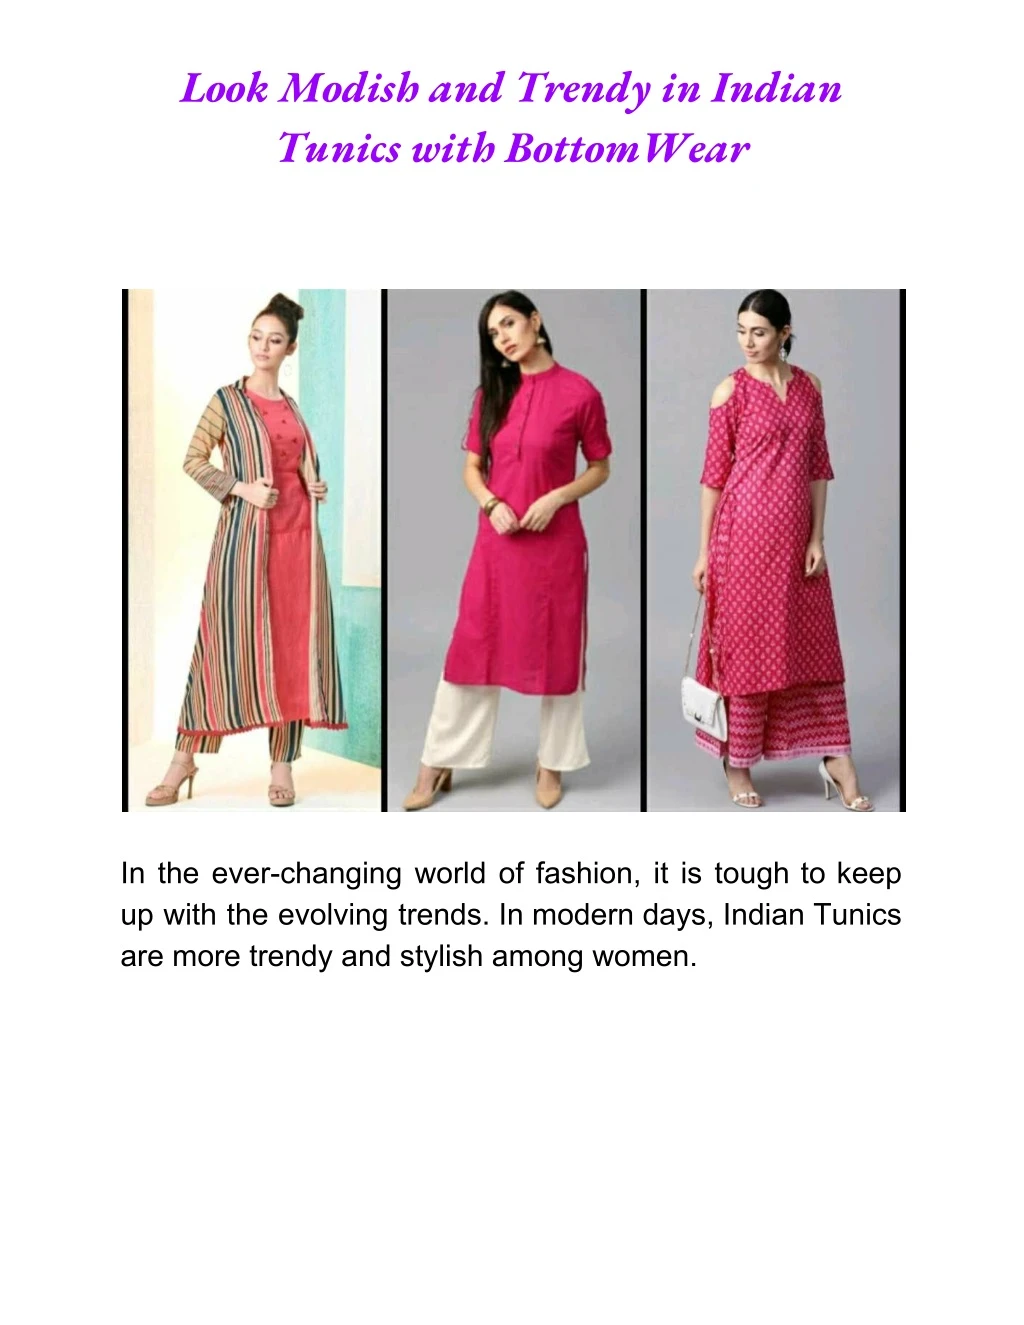 look modish and trendy in indian tunics with